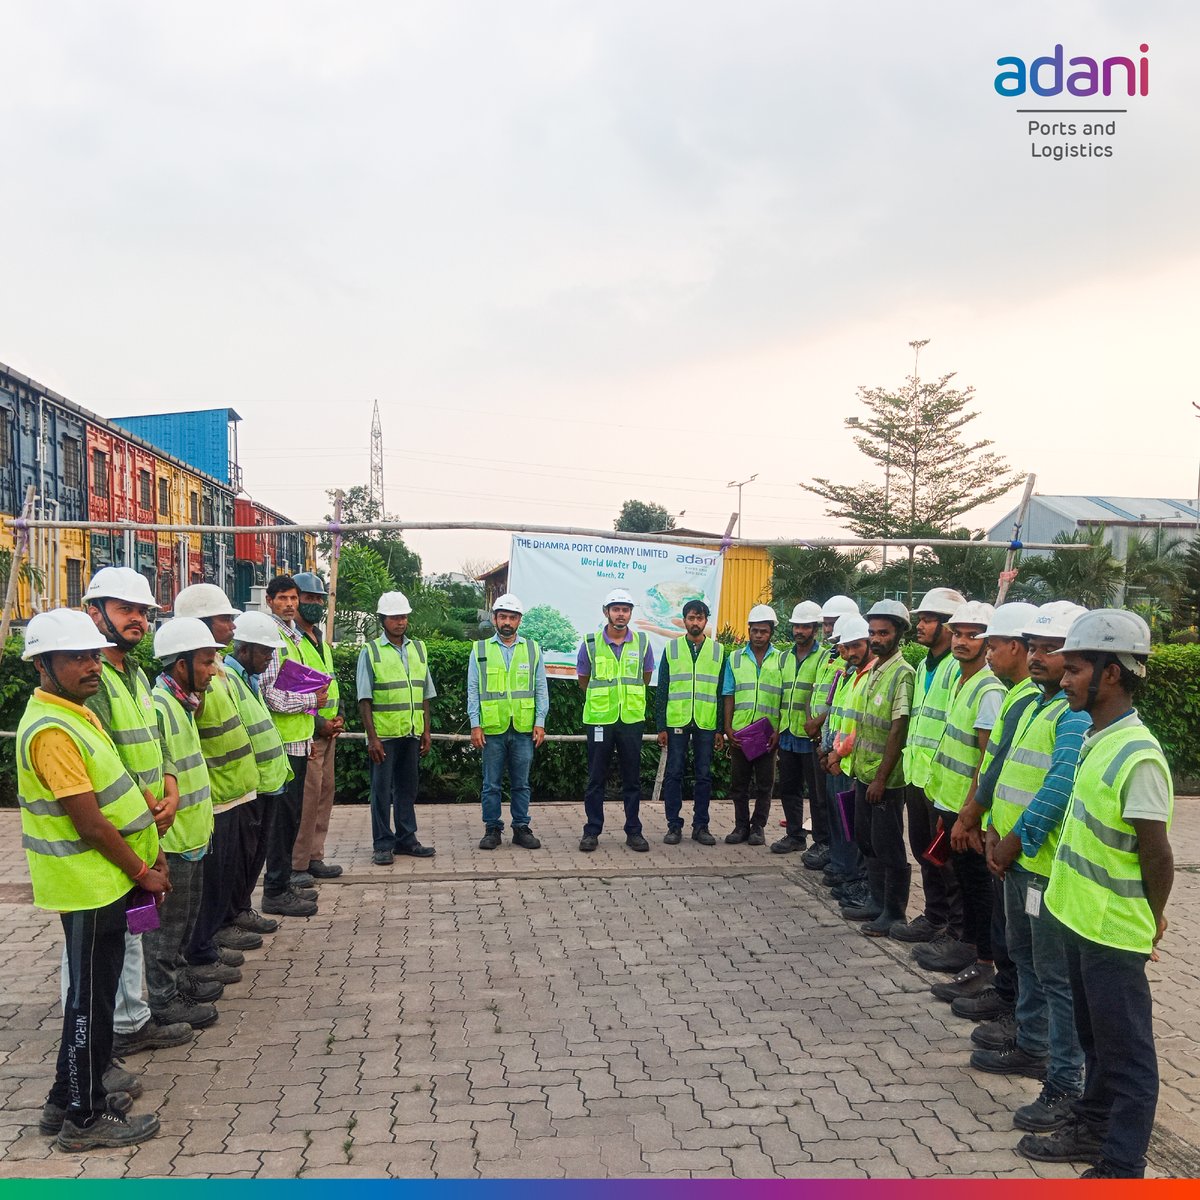 Reflecting on #WorldWaterDay at Dhamra Port, where we explored 'Leveraging Water For Peace'. From discussions on water's role in peace-building to fostering cooperation, our employees and workers engaged in meaningful dialogue and awareness.